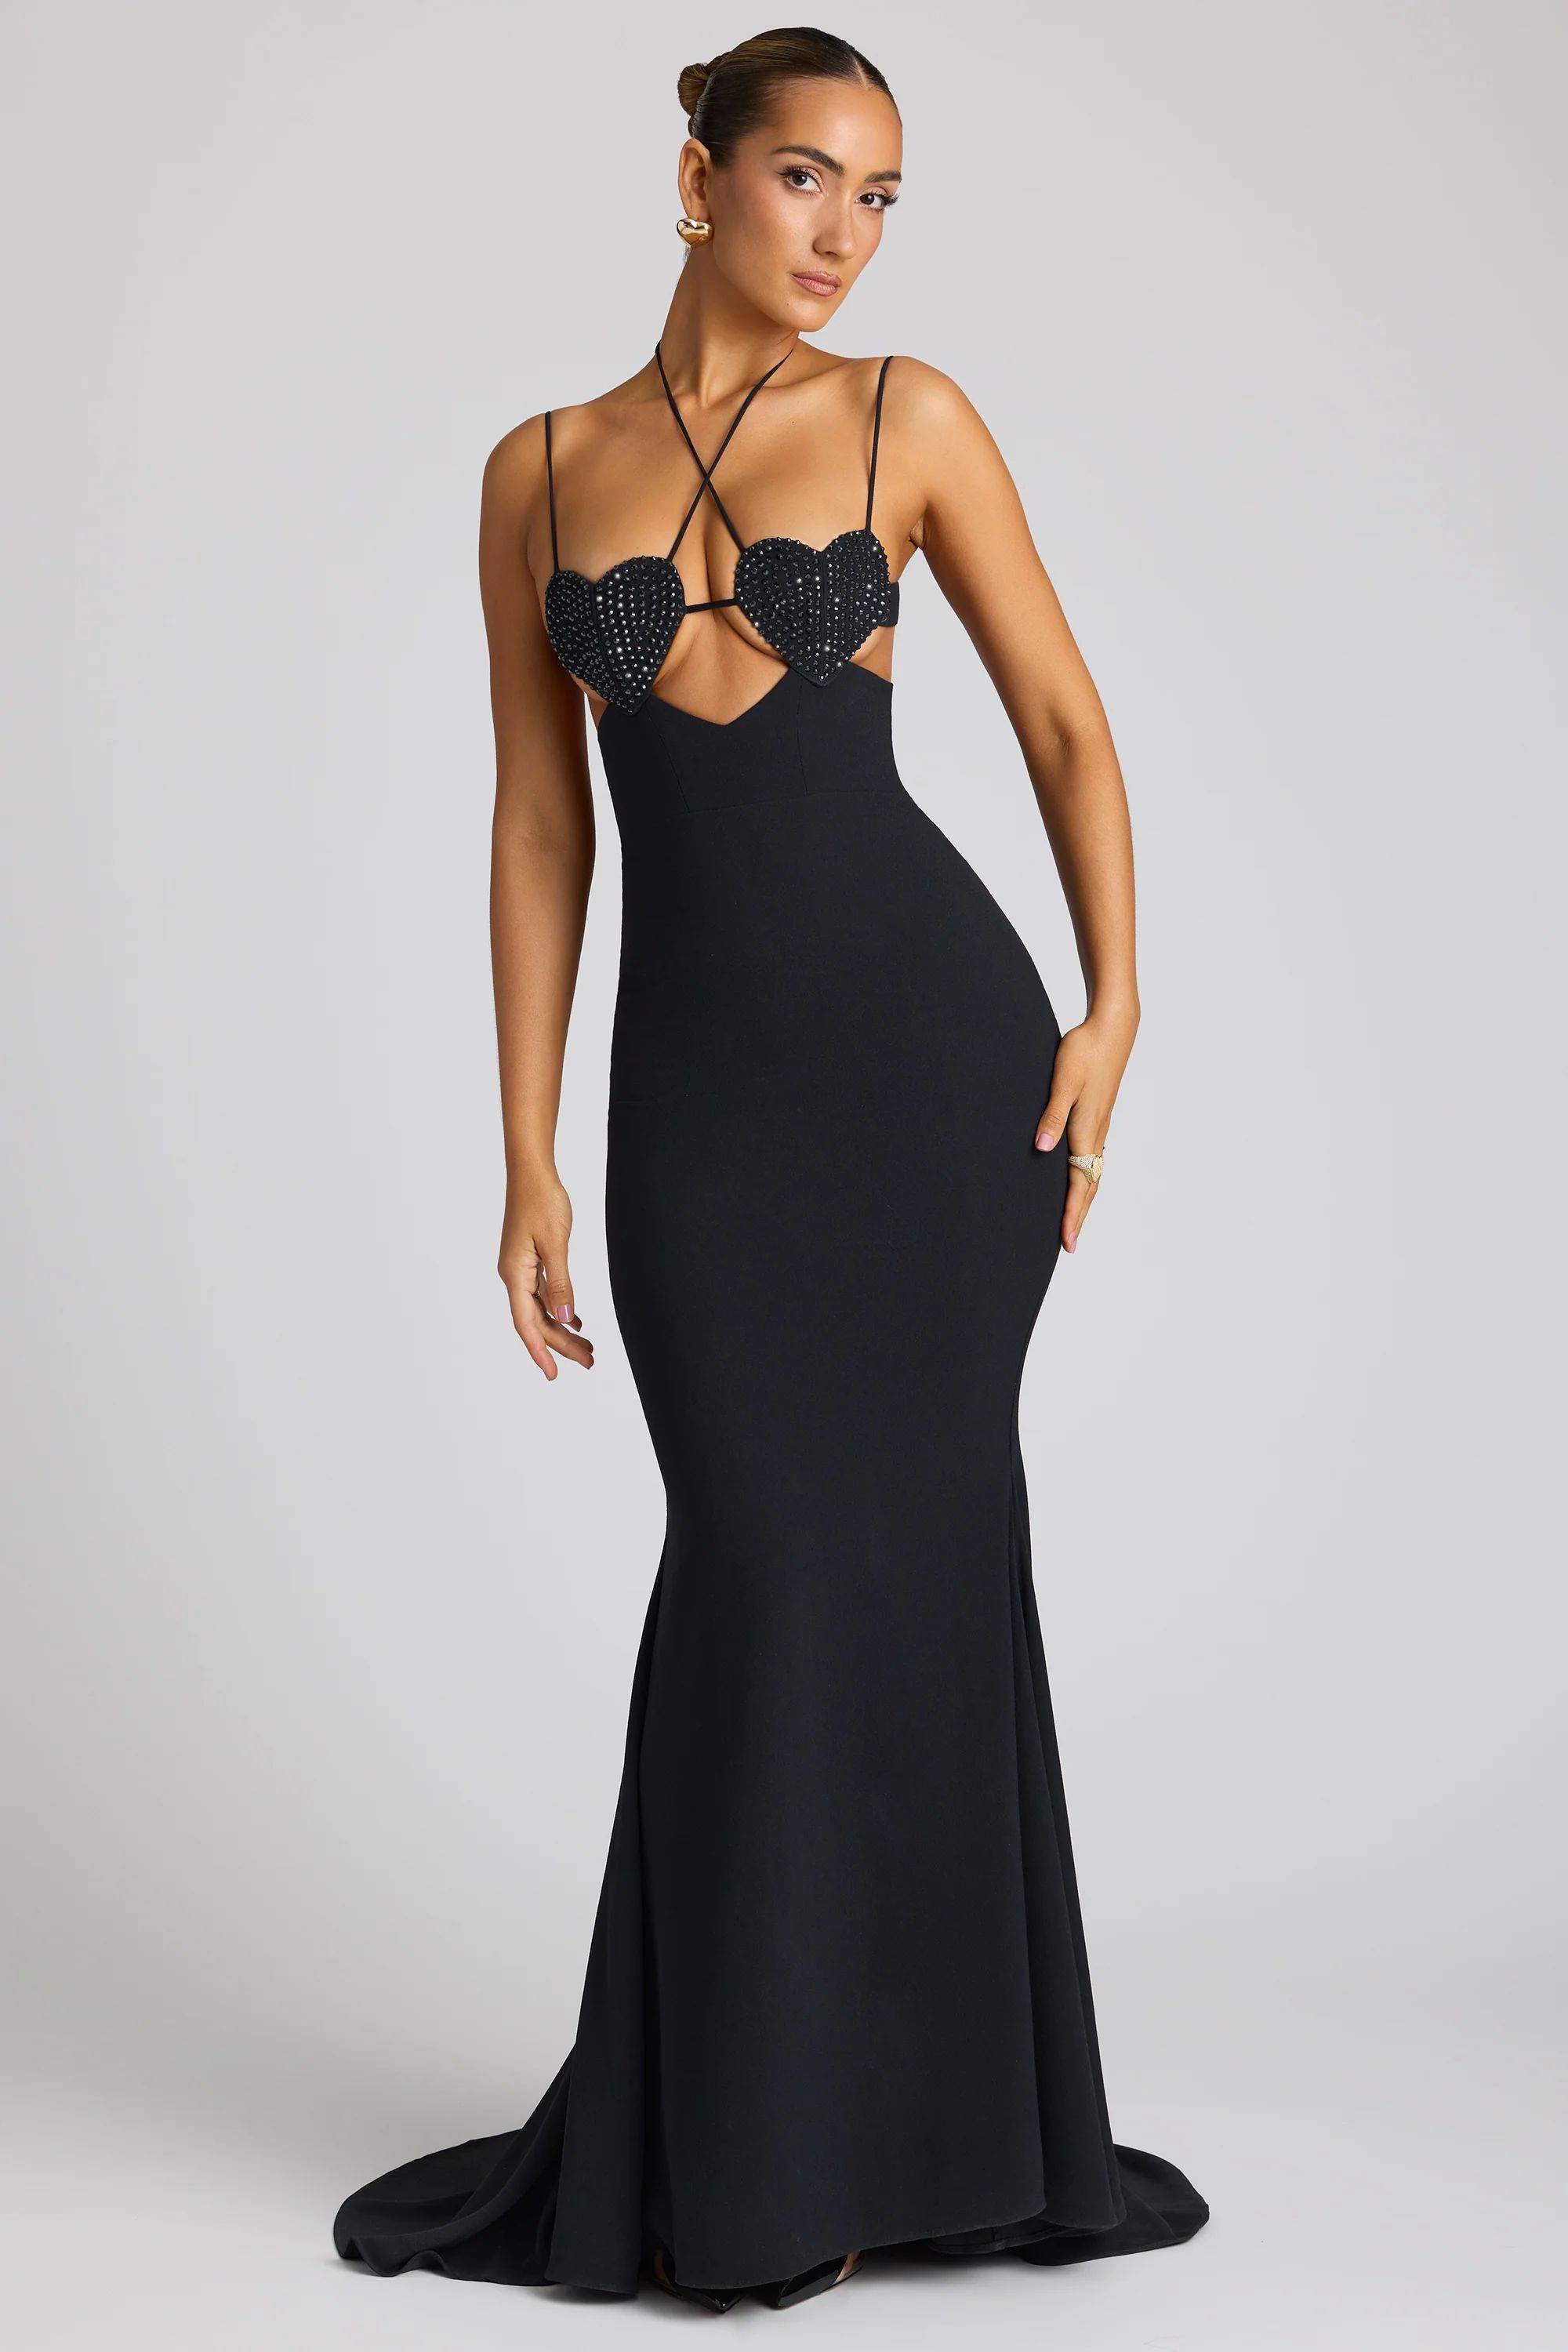 Embellished Heart Cup Detail Evening Gown in Black | Oh Polly